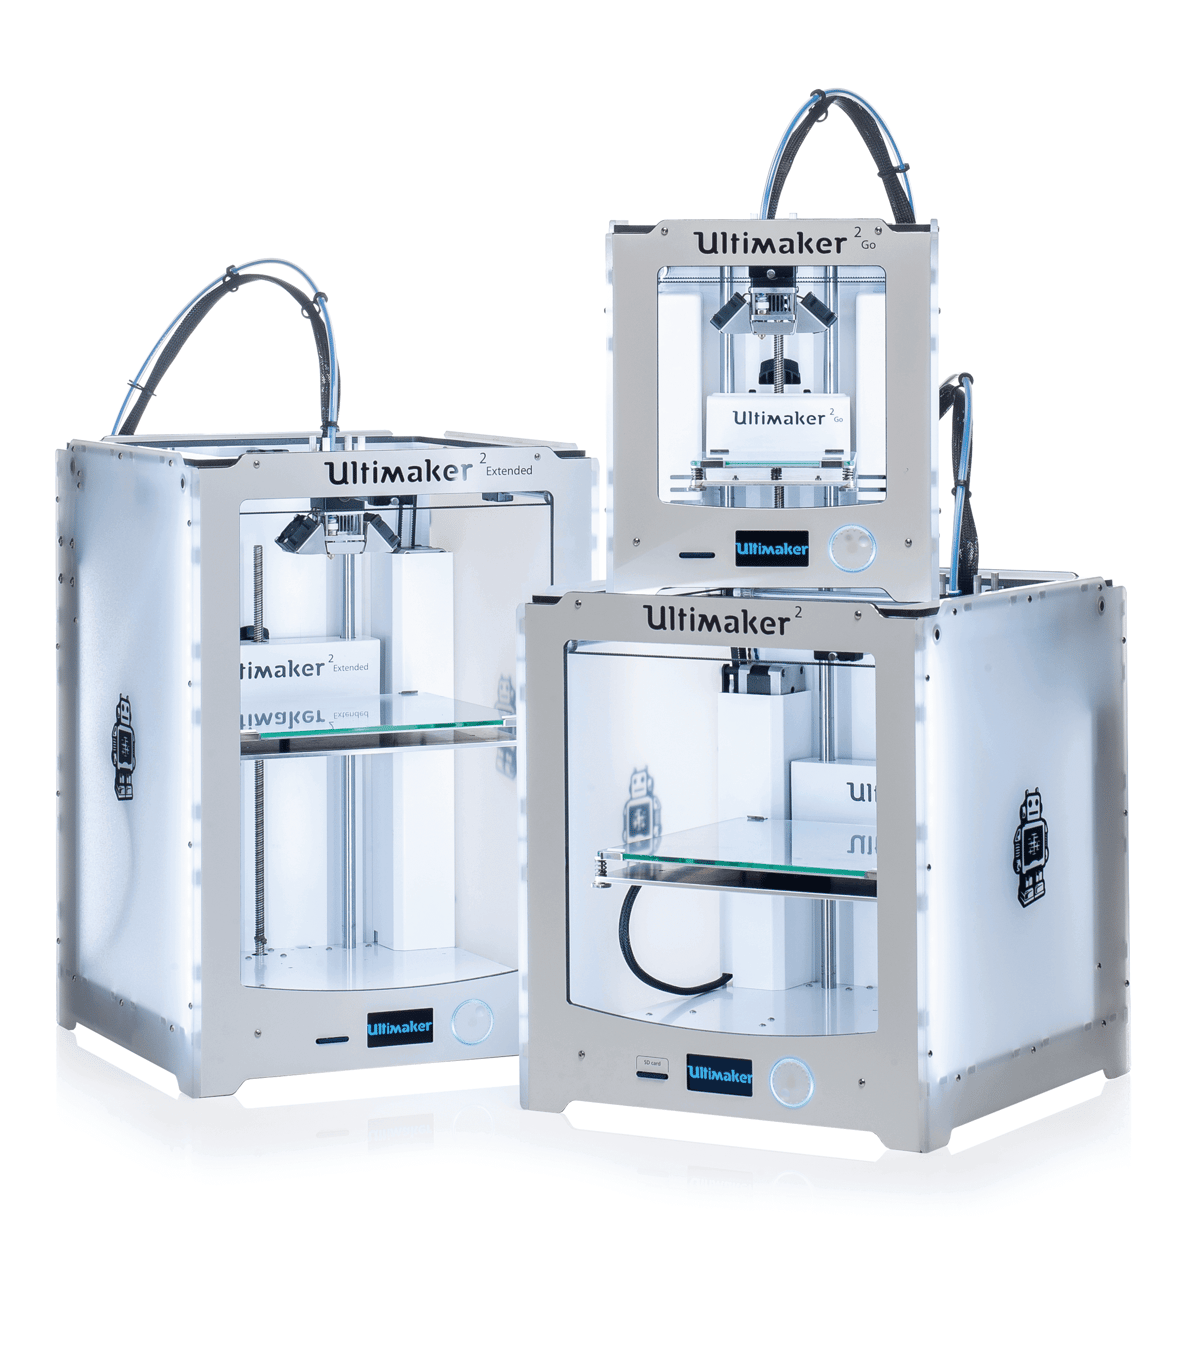 The new family of Ultimaker 3D printers (image: Ultimaker)